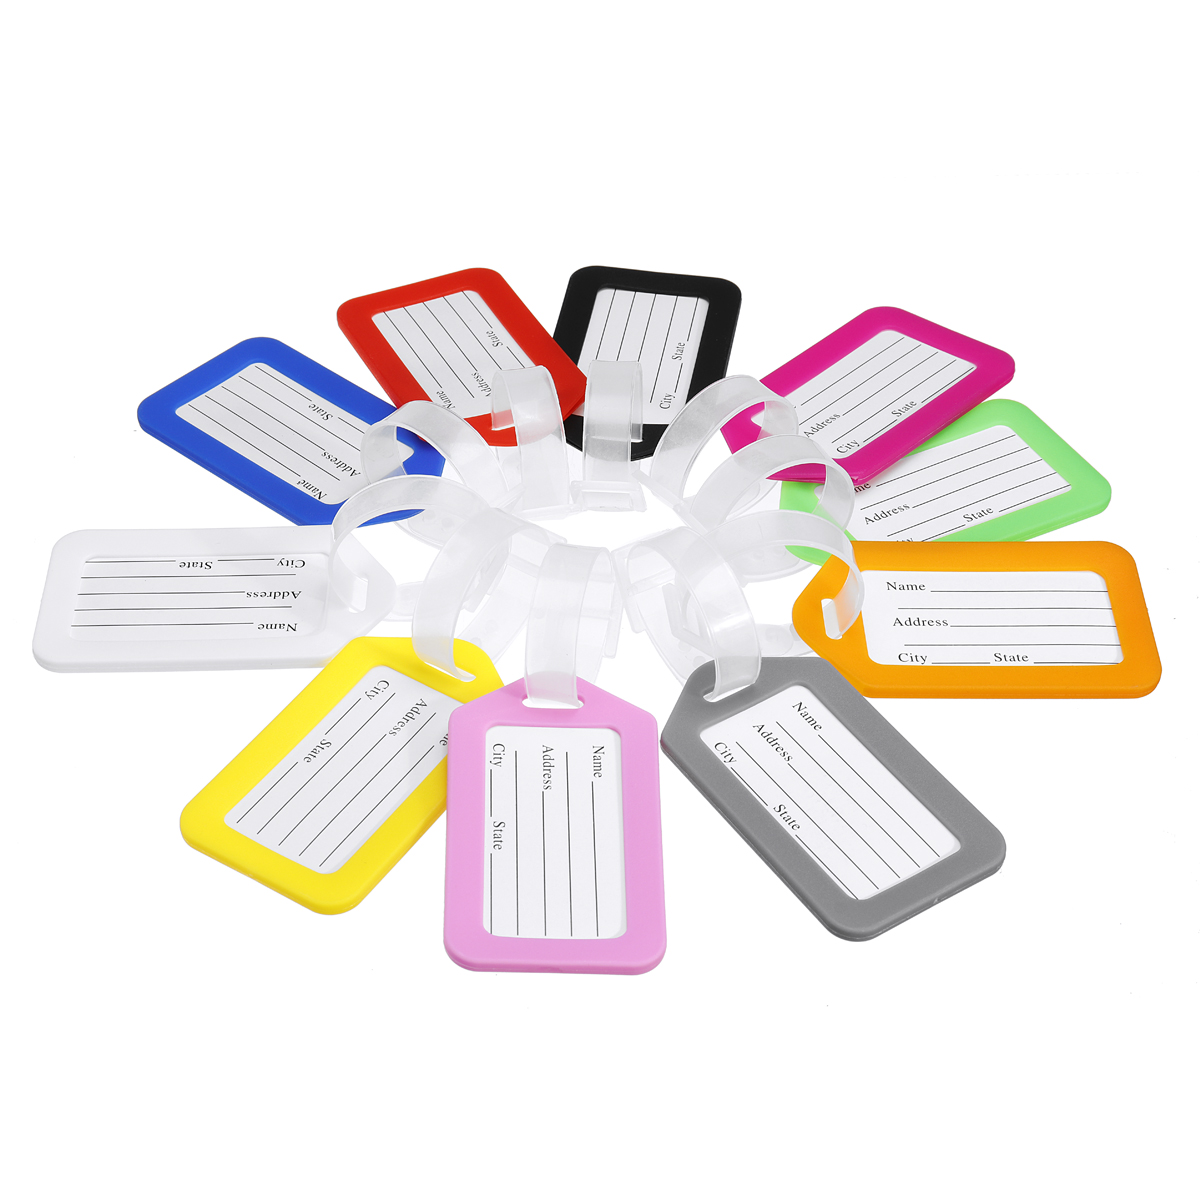 10-Pcs-Luggage-Bag-Tag-Name-Address-ID-Label-Plastic-Travel-Bag-Tags-for-Suitcase-Bag-1714336-3